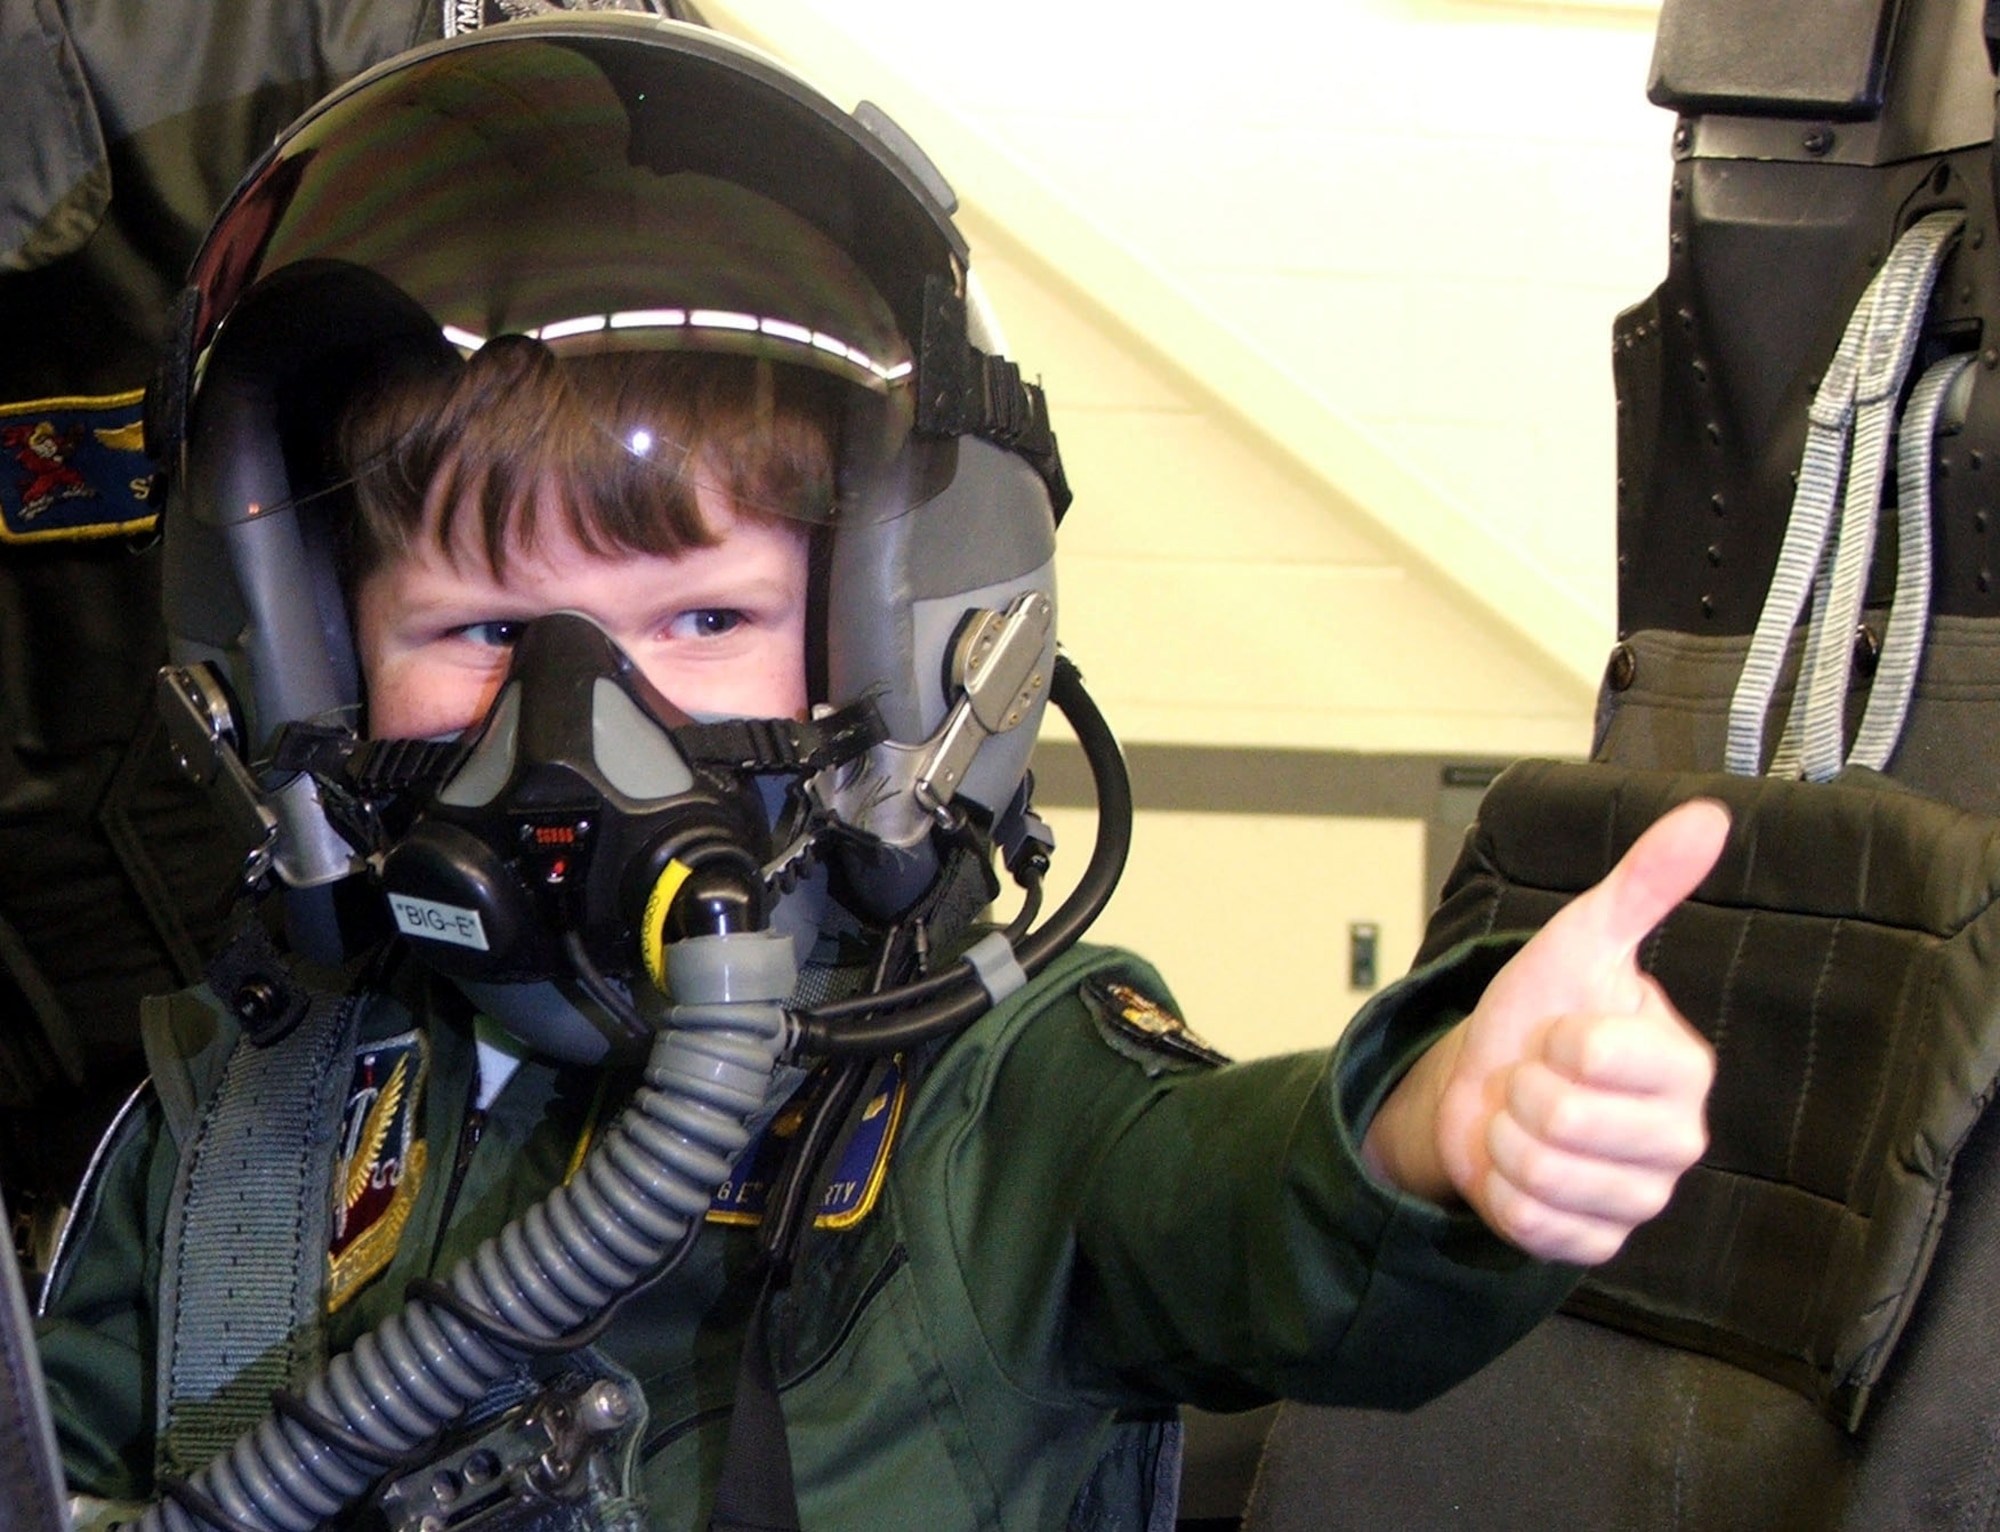 SEYMOUR JOHNSON AIR FORCE BASE, N.C. -- Five-year-old Evan Moriarty gives a thumbs up to family and friends during a ride in an F-15E Strike Eagle simulator April 15.  Riding in a jet has been a long time wish of the "Top Gun" fan, which was made possible by the Make-a-Wish Foundation and Airmen here.  (U.S. Air Force photo by Airman 1st Class Pablo Jara Meza)